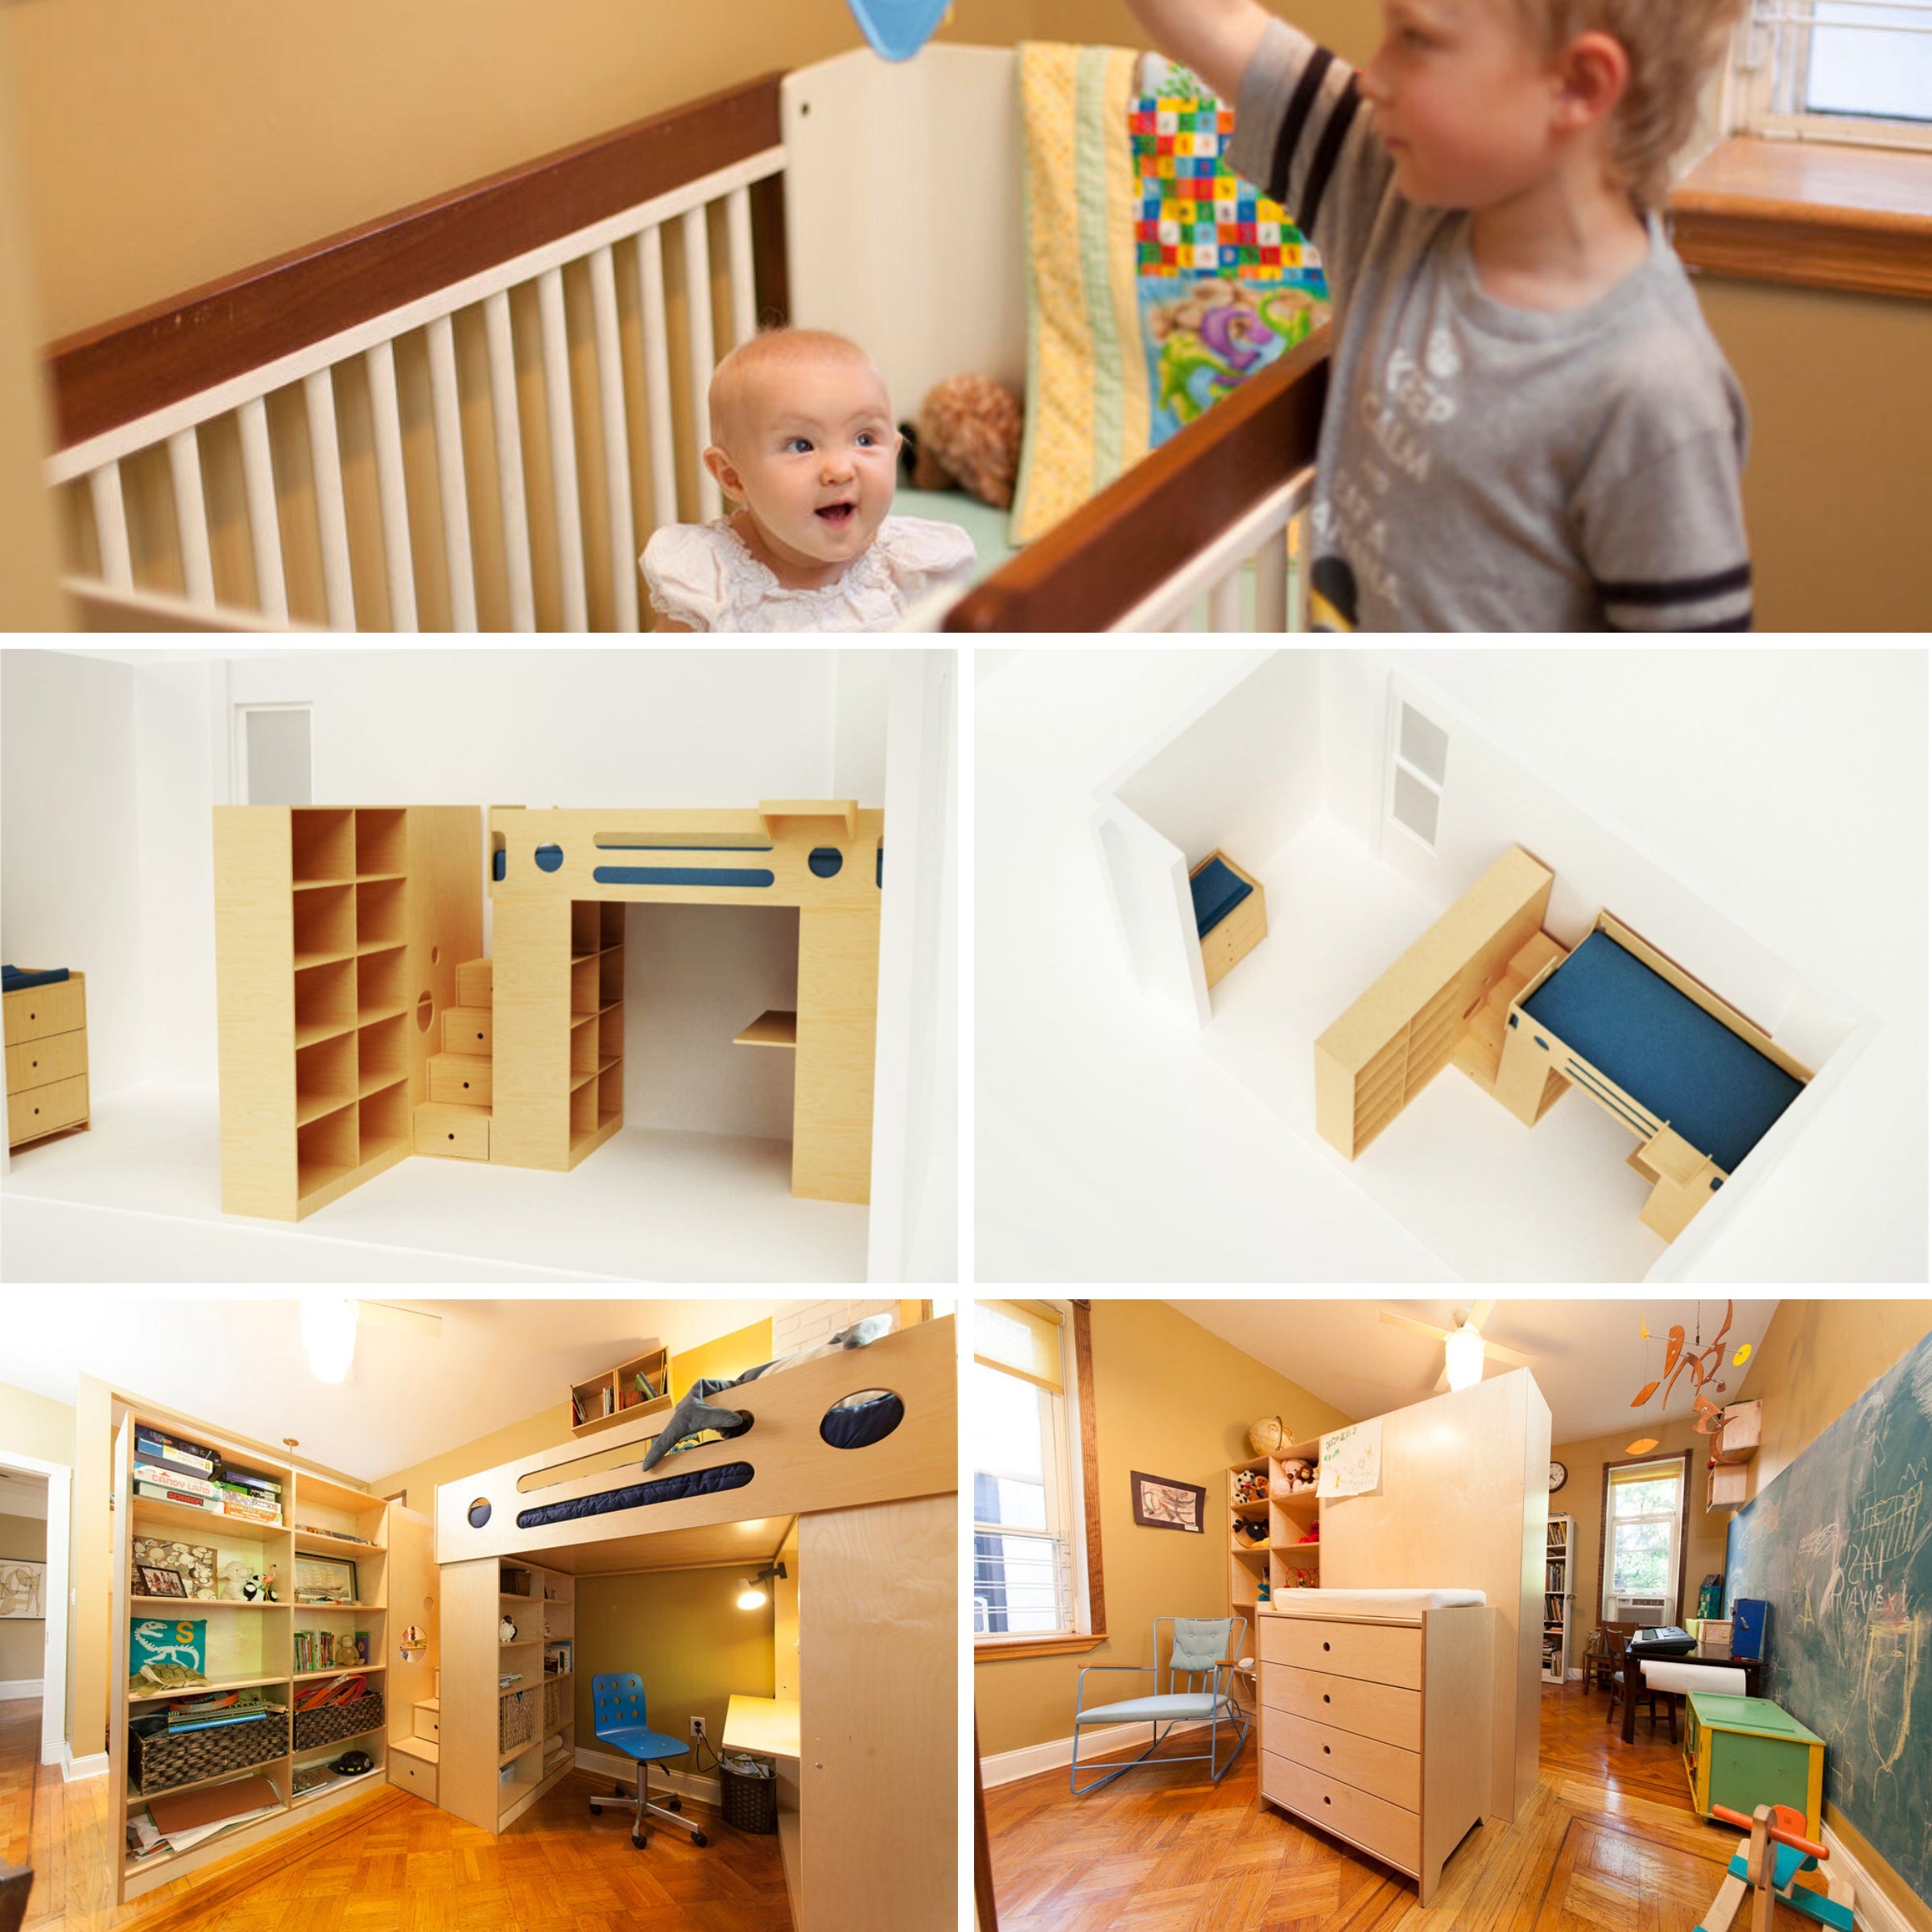 Collage of kids' rooms: baby in crib, and diverse setups with beds, desks, and shelves.